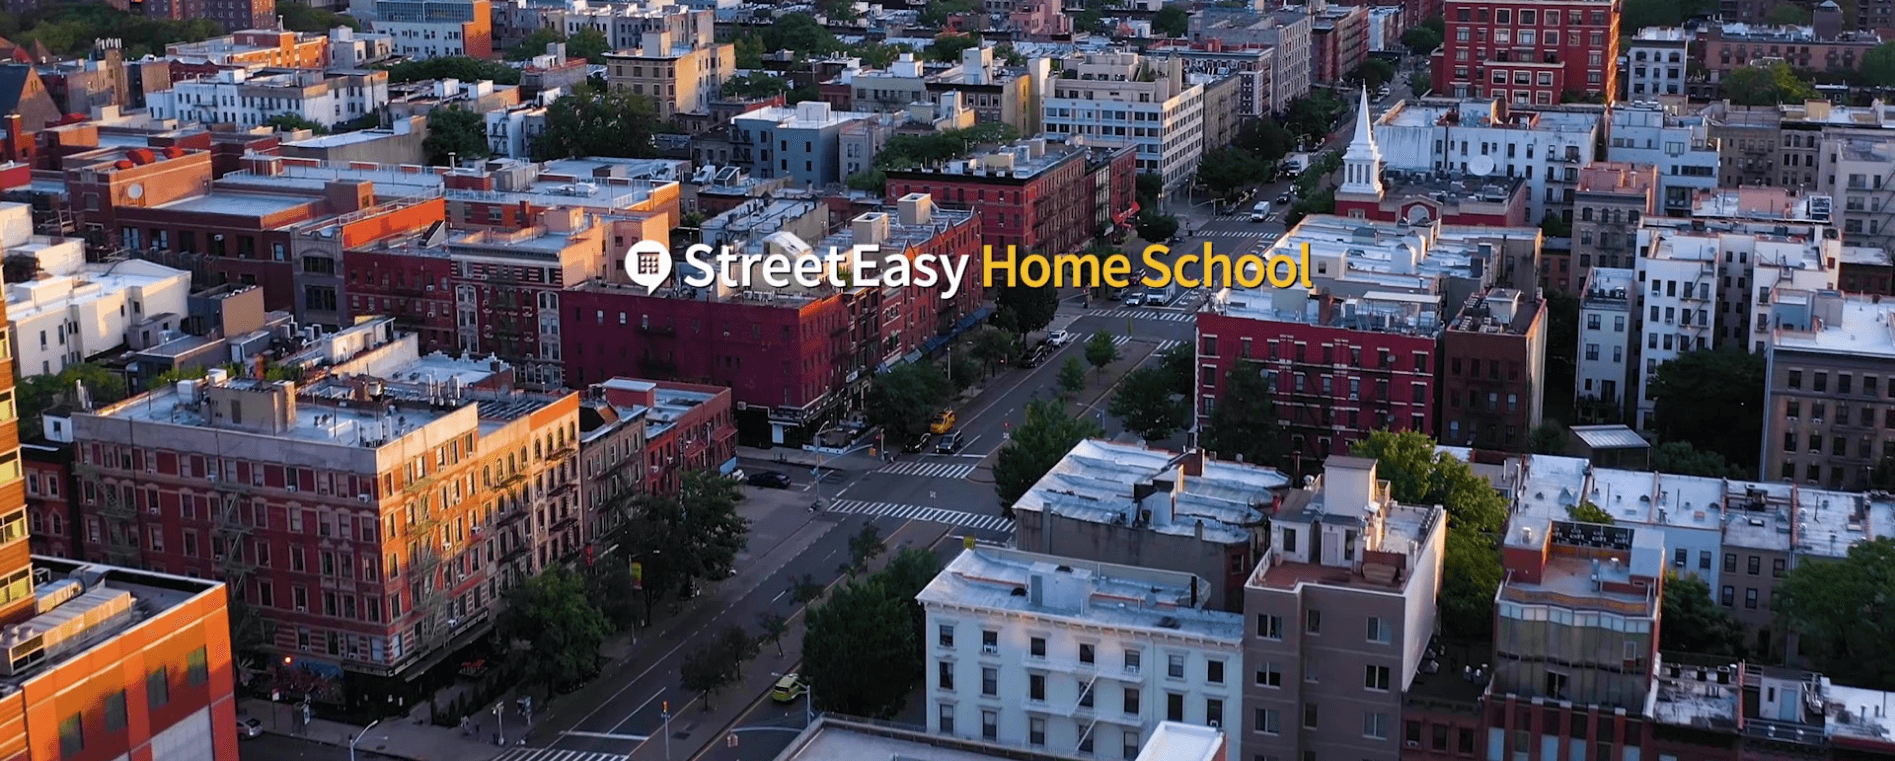 StreetEasy Home School how to sell your home in NYC